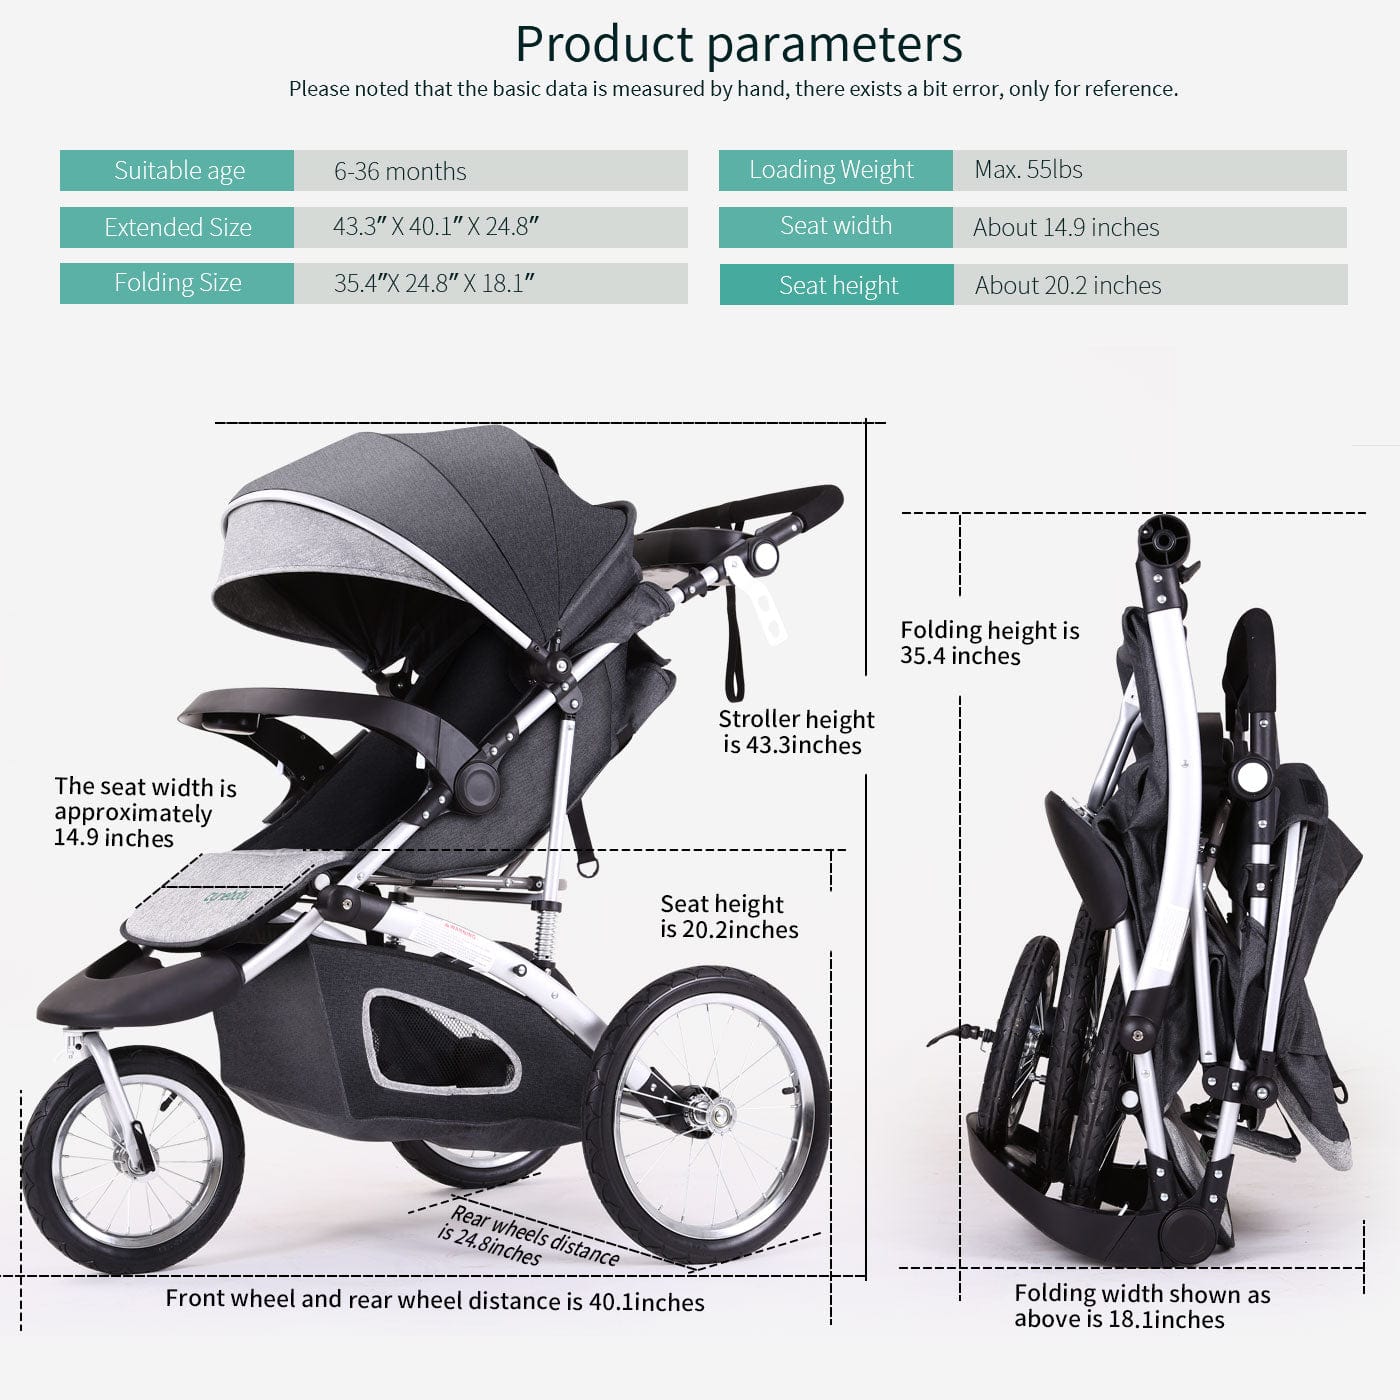 Proactive Baby Jogging Stroller Foldable Jogging Stroller Single Toddler Stroller Jogging Compact Ultra-light Stroller Can be Carried for Trave